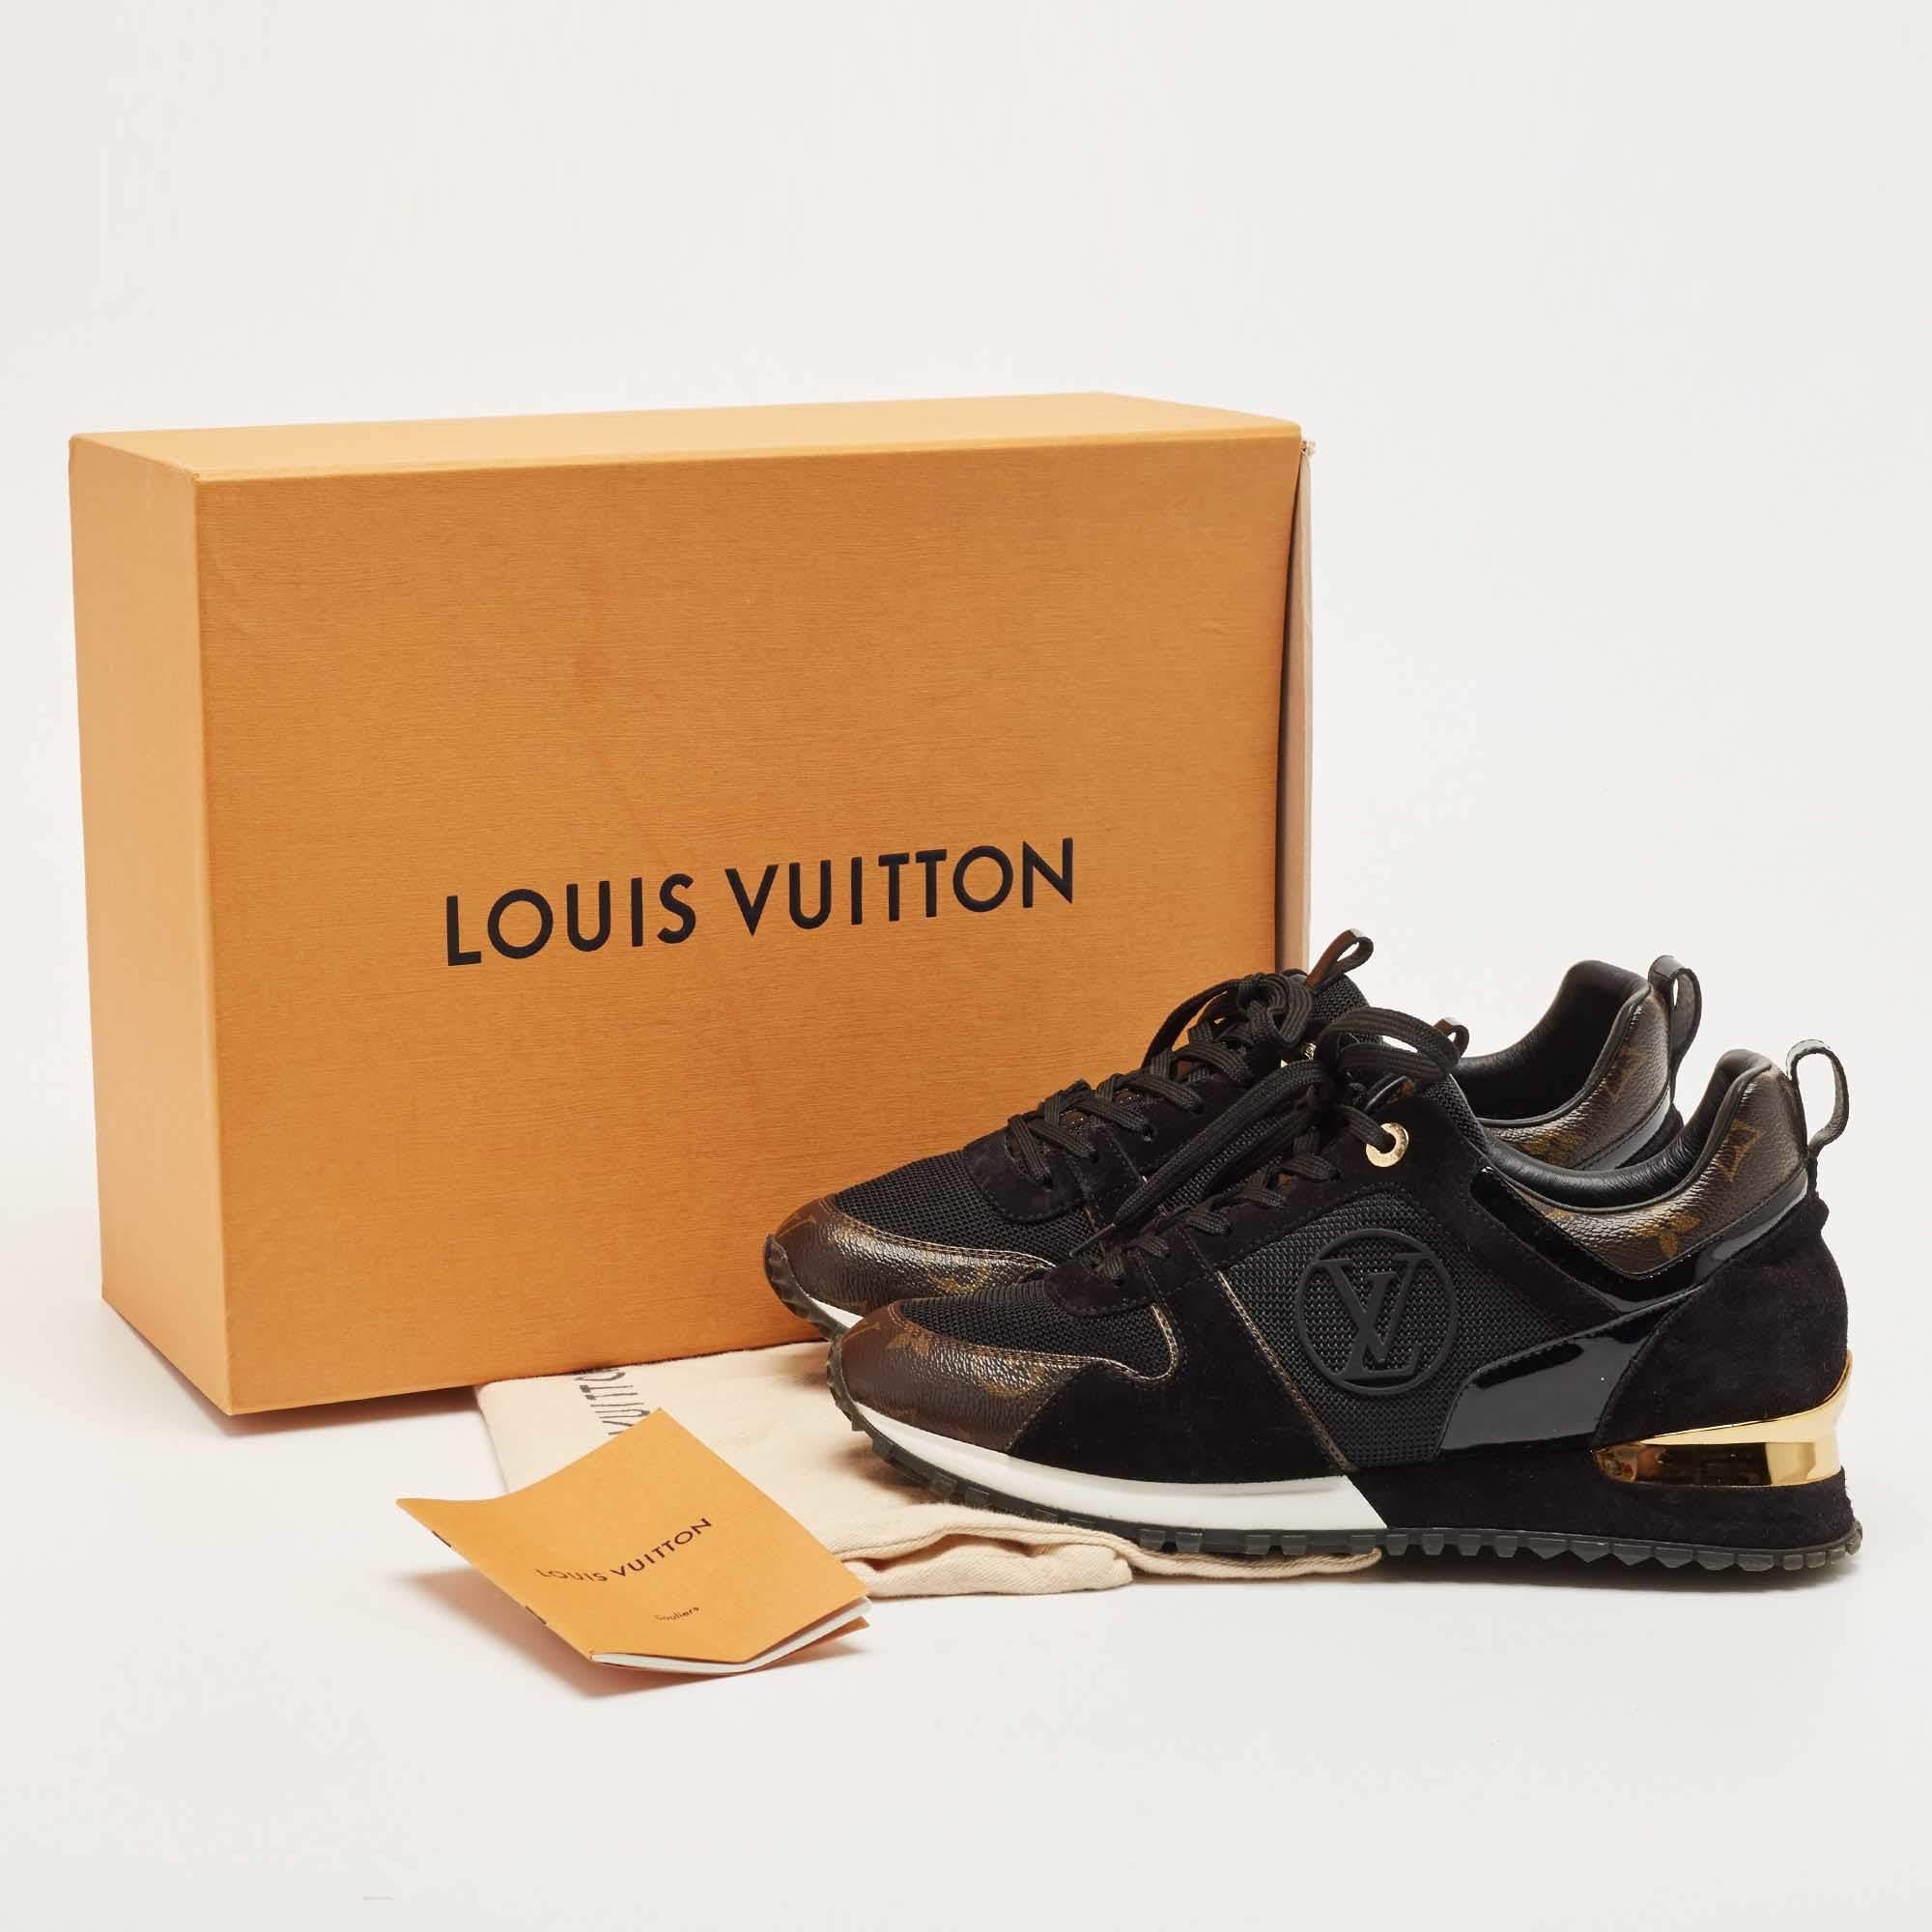 Louis Vuitton Brown/Black Canvas and Suede Run Away Sneakers Size 38.5 5